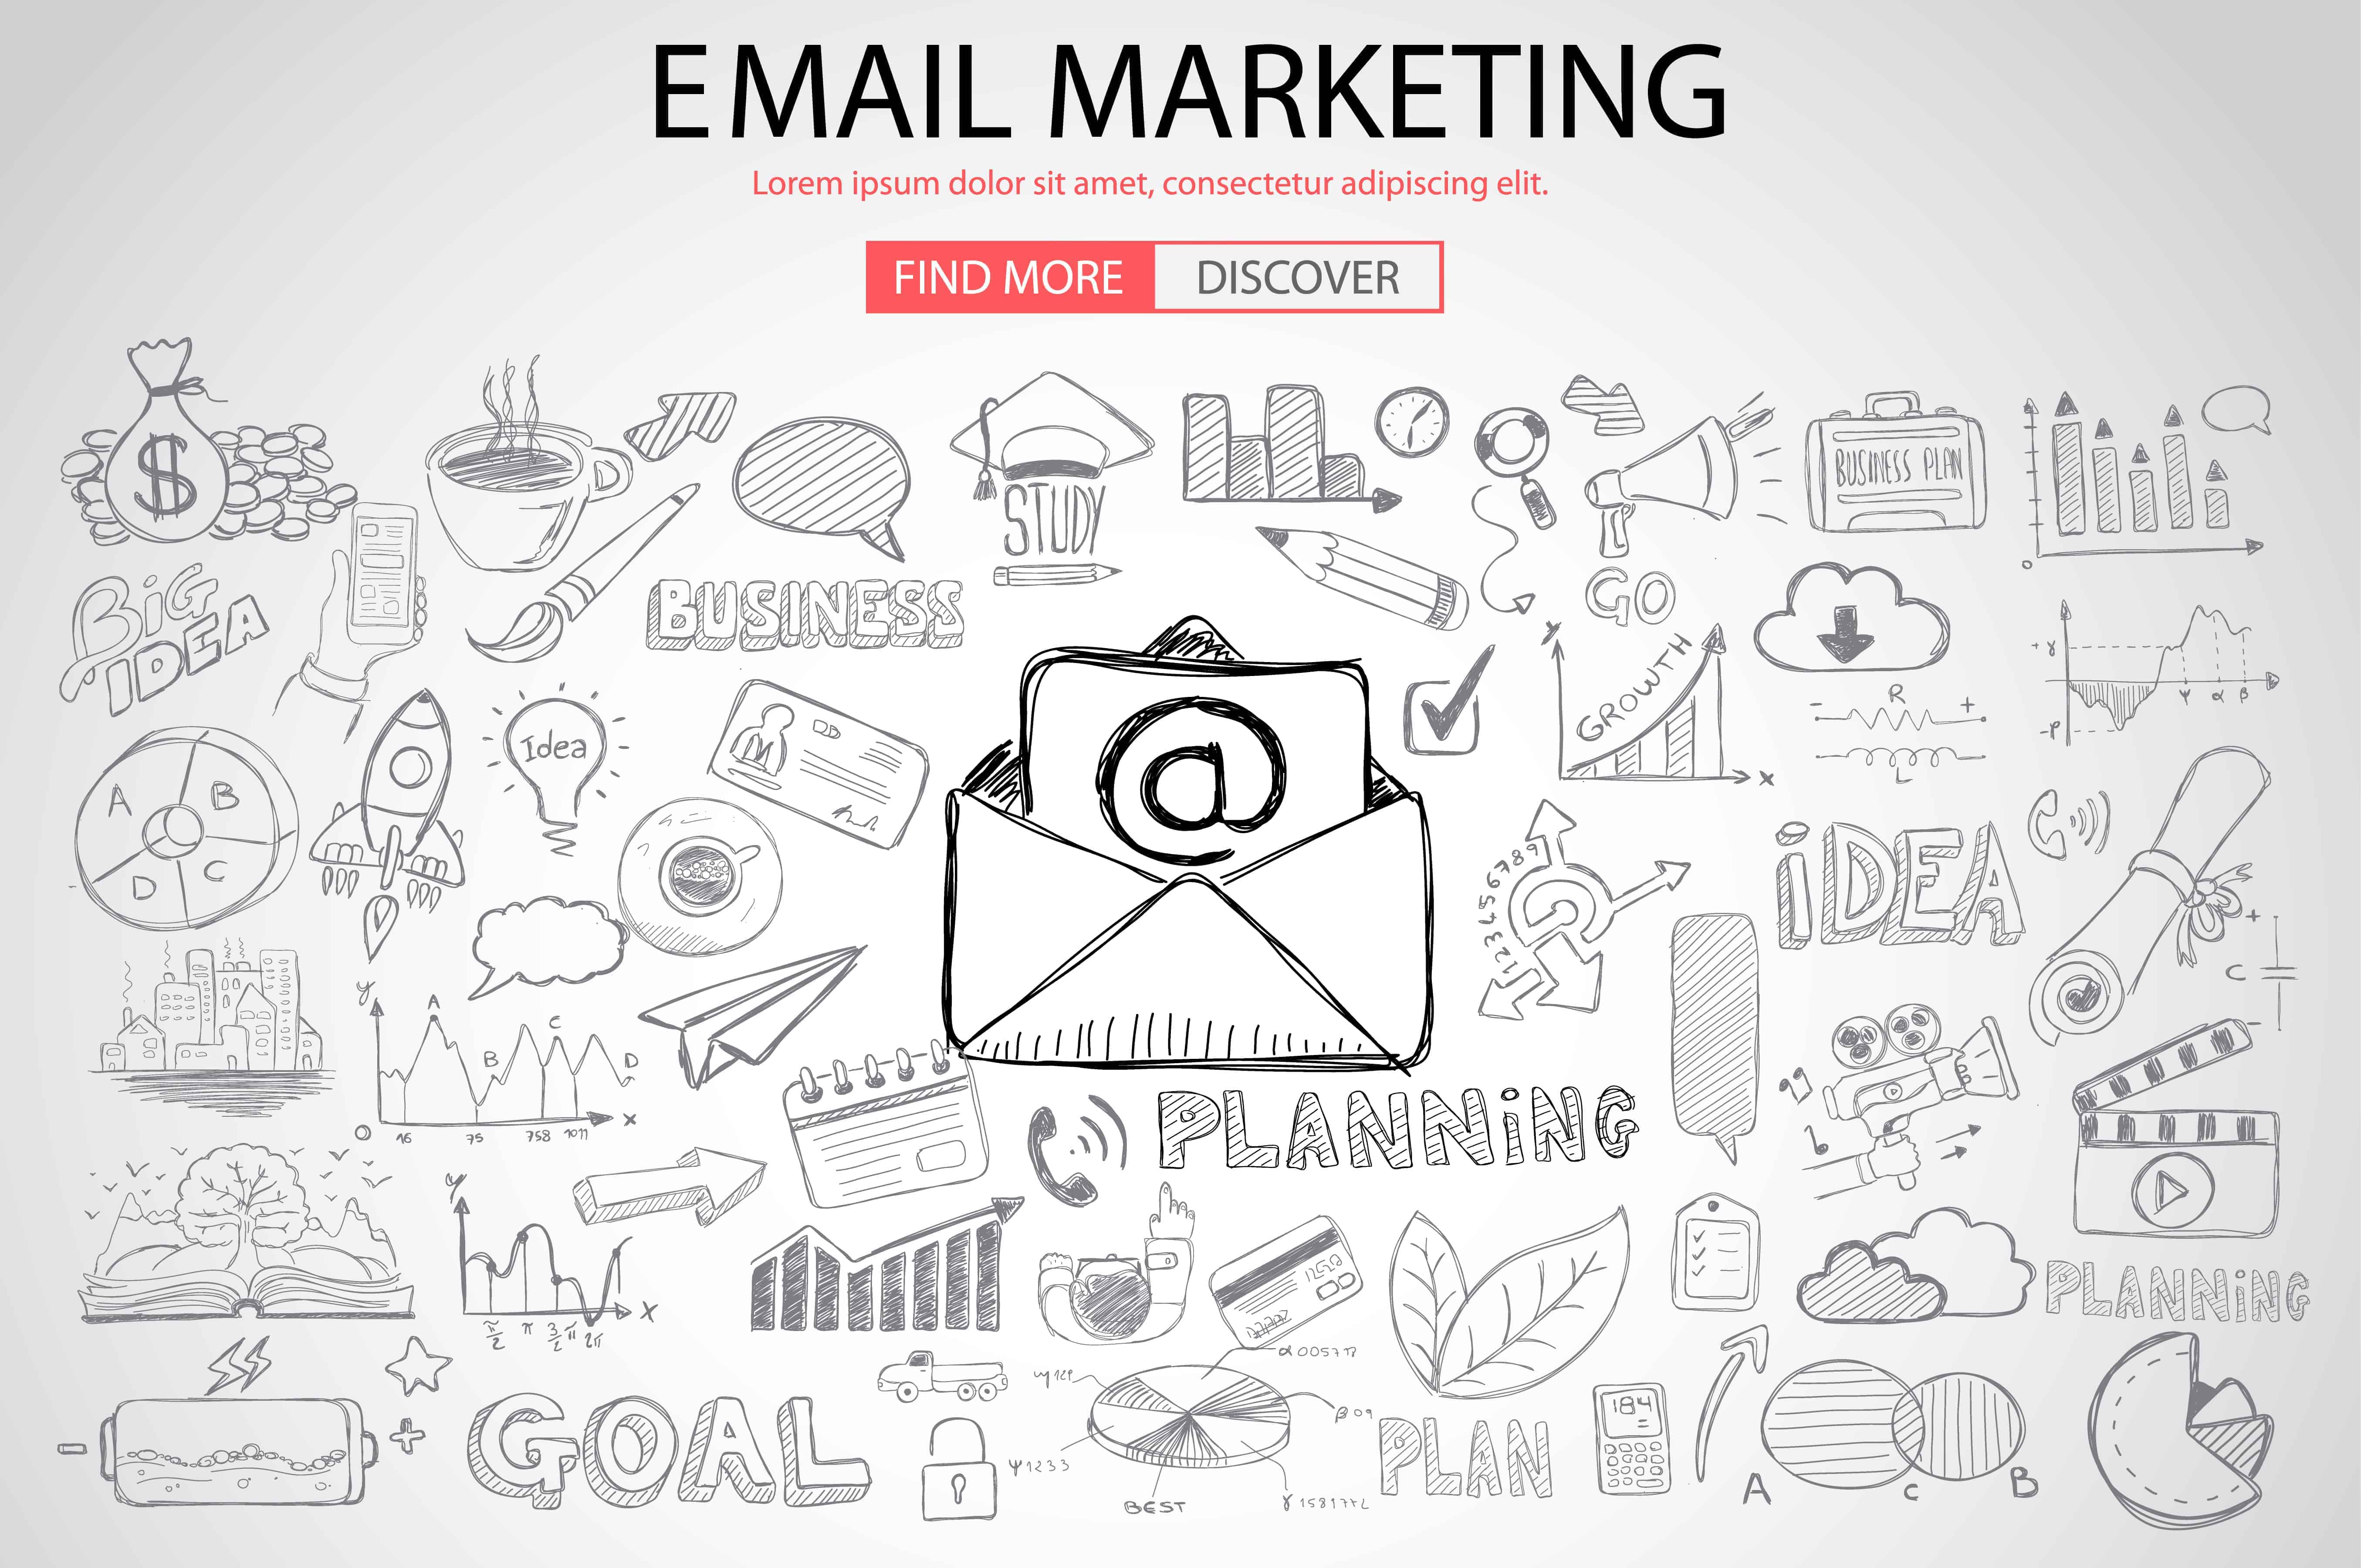 Email Marketing with Doodle design style :sending visual emails, promotions, creative designs. Modern style illustration for web banners, brochure and flyers.